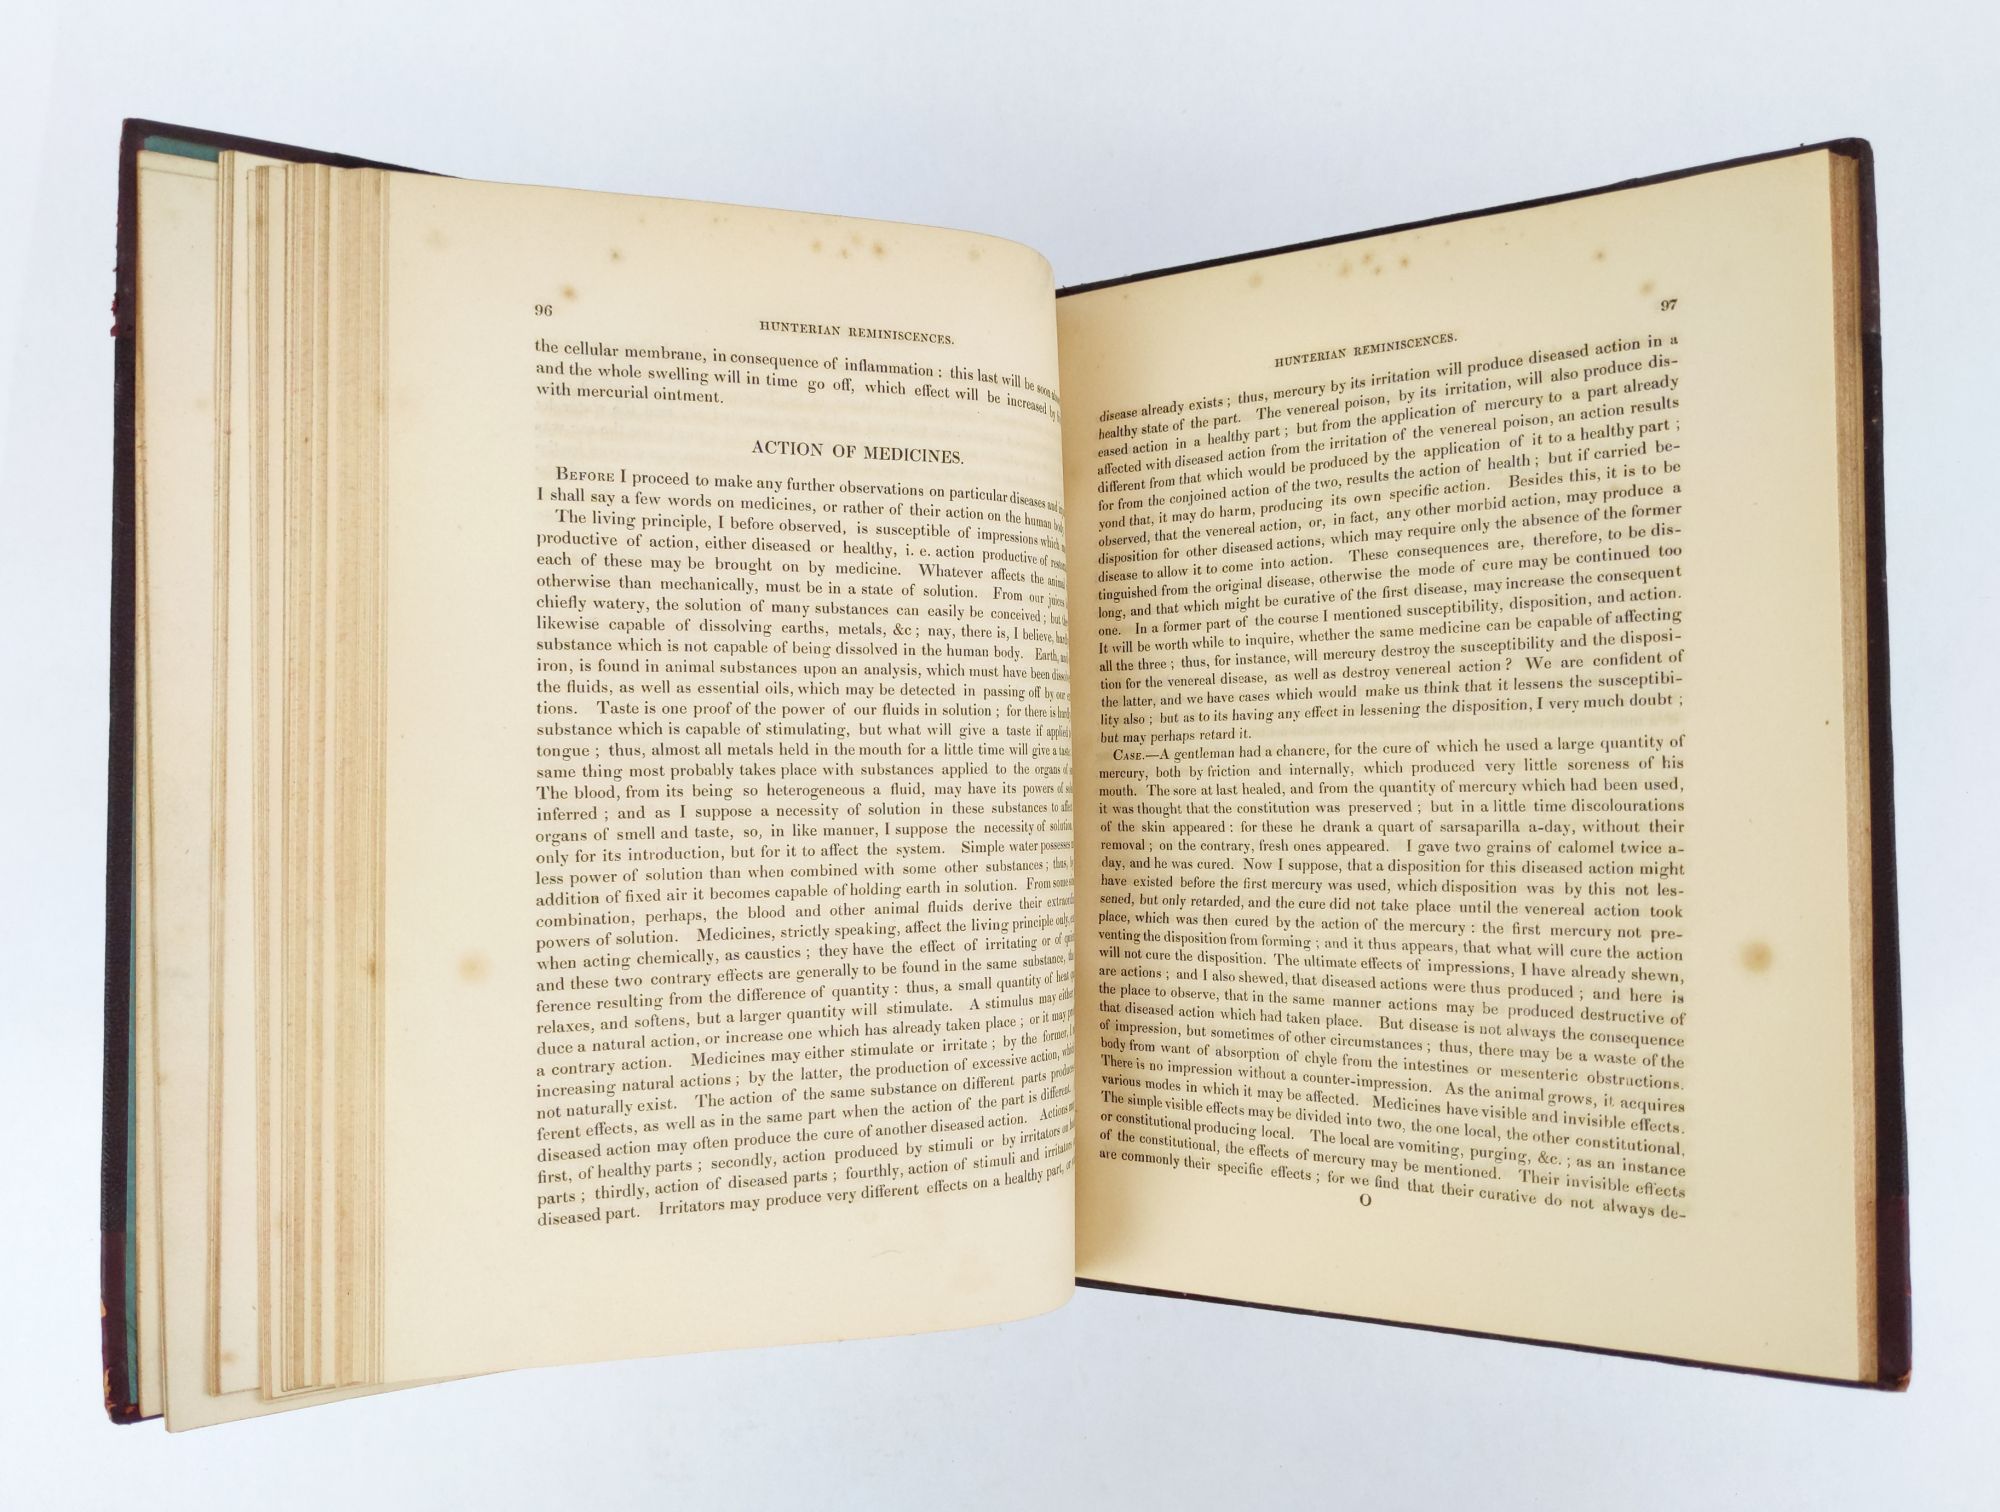 Product Image for HUNTERIAN REMINISCENCES; BEING THE SUBSTANCE OF A COURSE OF LECTURES ON THE PRINCIPLES AND PRACTICE OF SURGERY, DELIVERED BY THE LATE MR. JOHN HUNTER, IN THE YEAR 1785